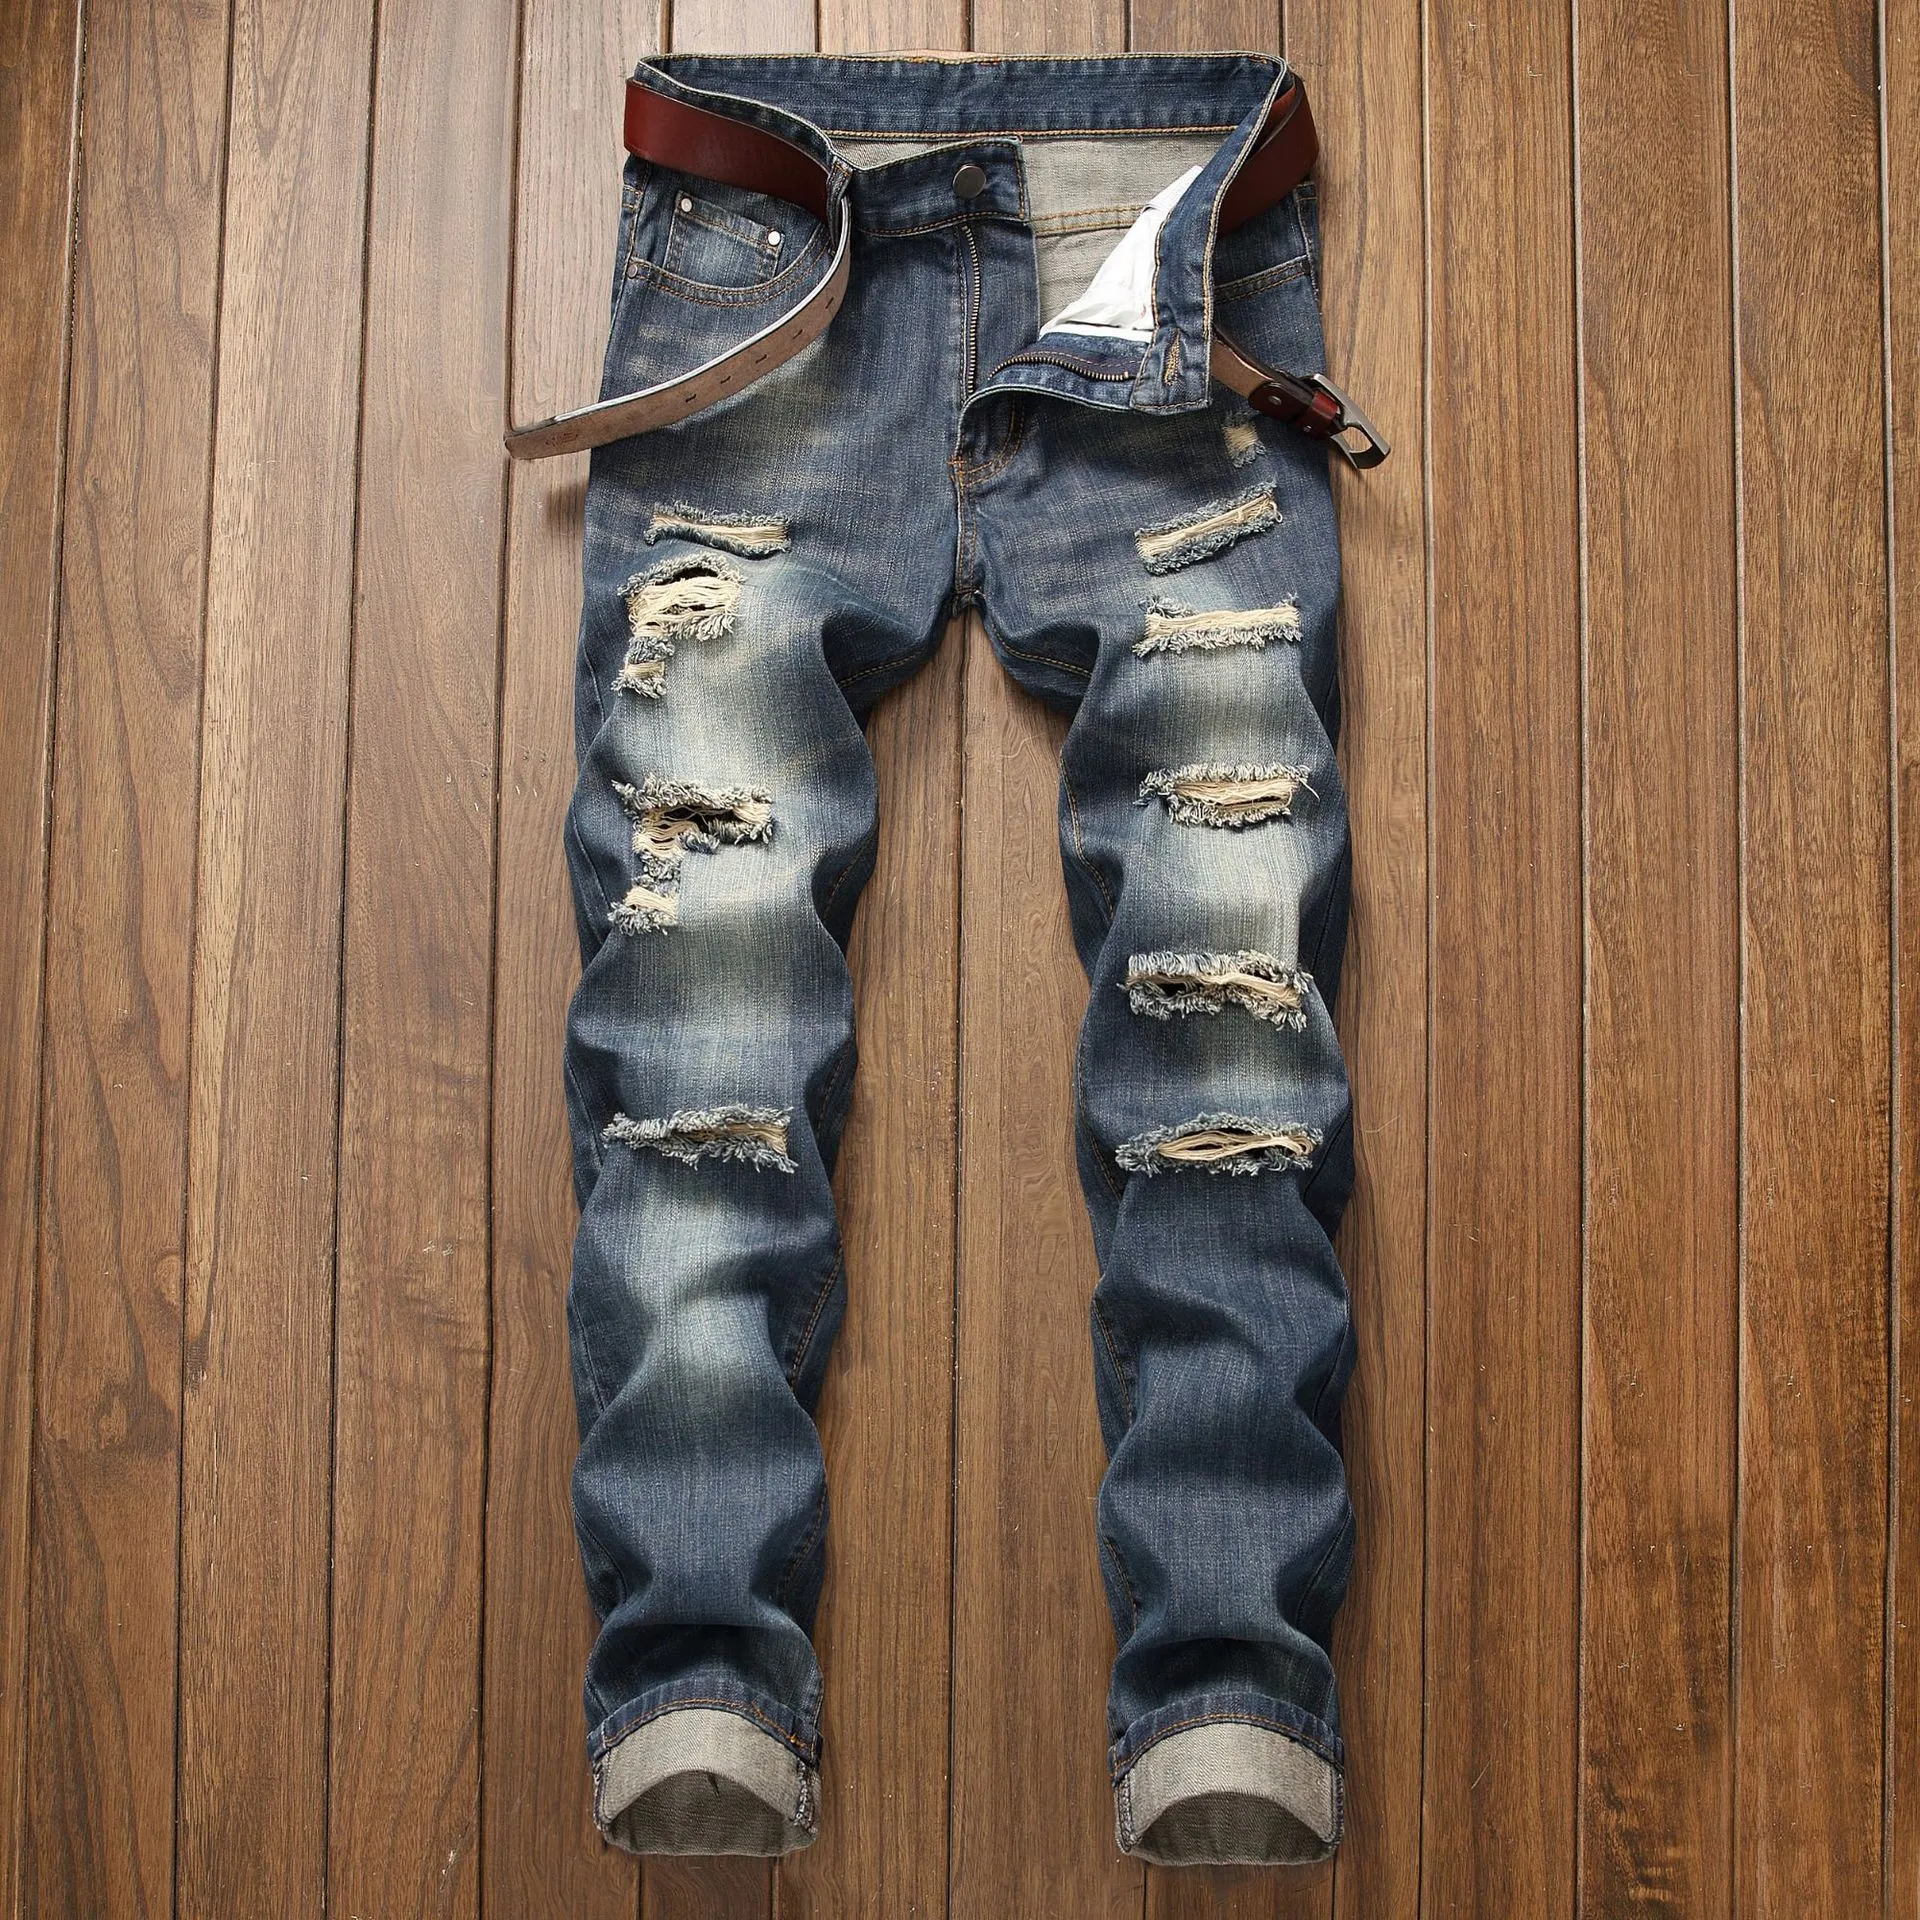 High Quality Men's Casual Ripped Jeans Washed Straight Slim Motorcycle Biker Jeans Pants Male Denim Trousers Plus Size